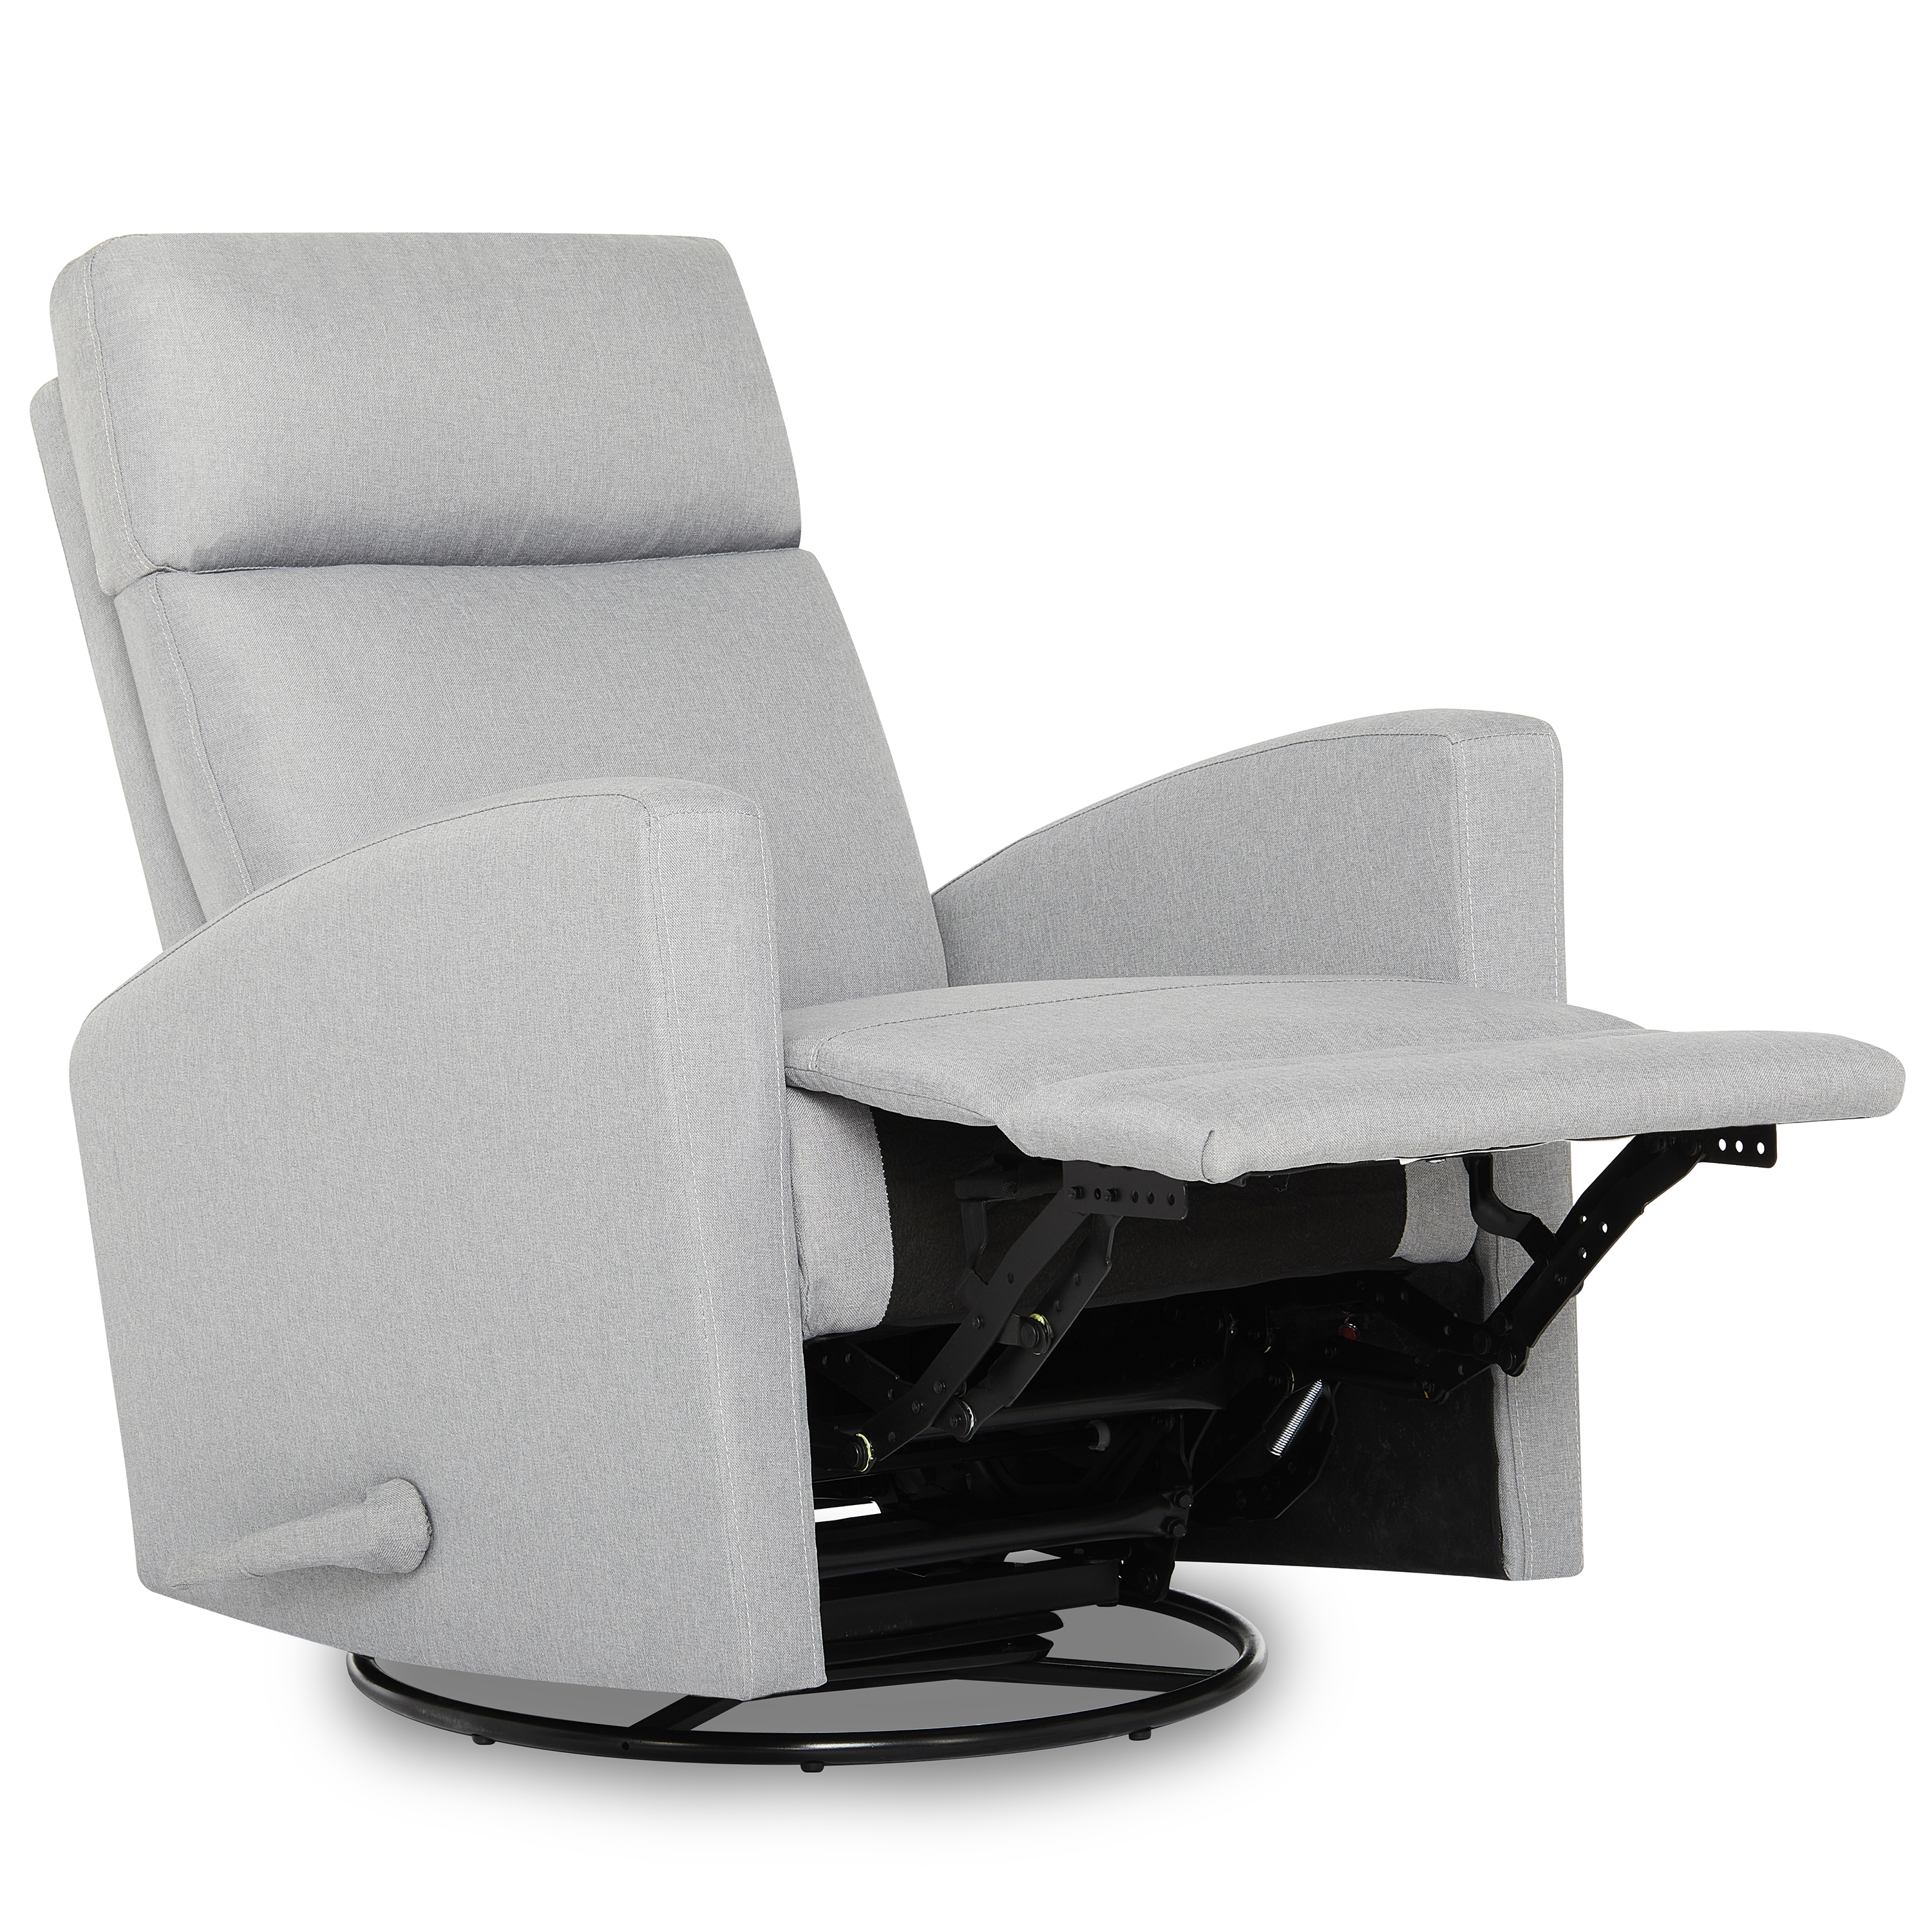 Dream On Me Chatham Swivel Gliding Recliner in Grey, FSC Certified, Durable Polyester Fabric - image 1 of 12